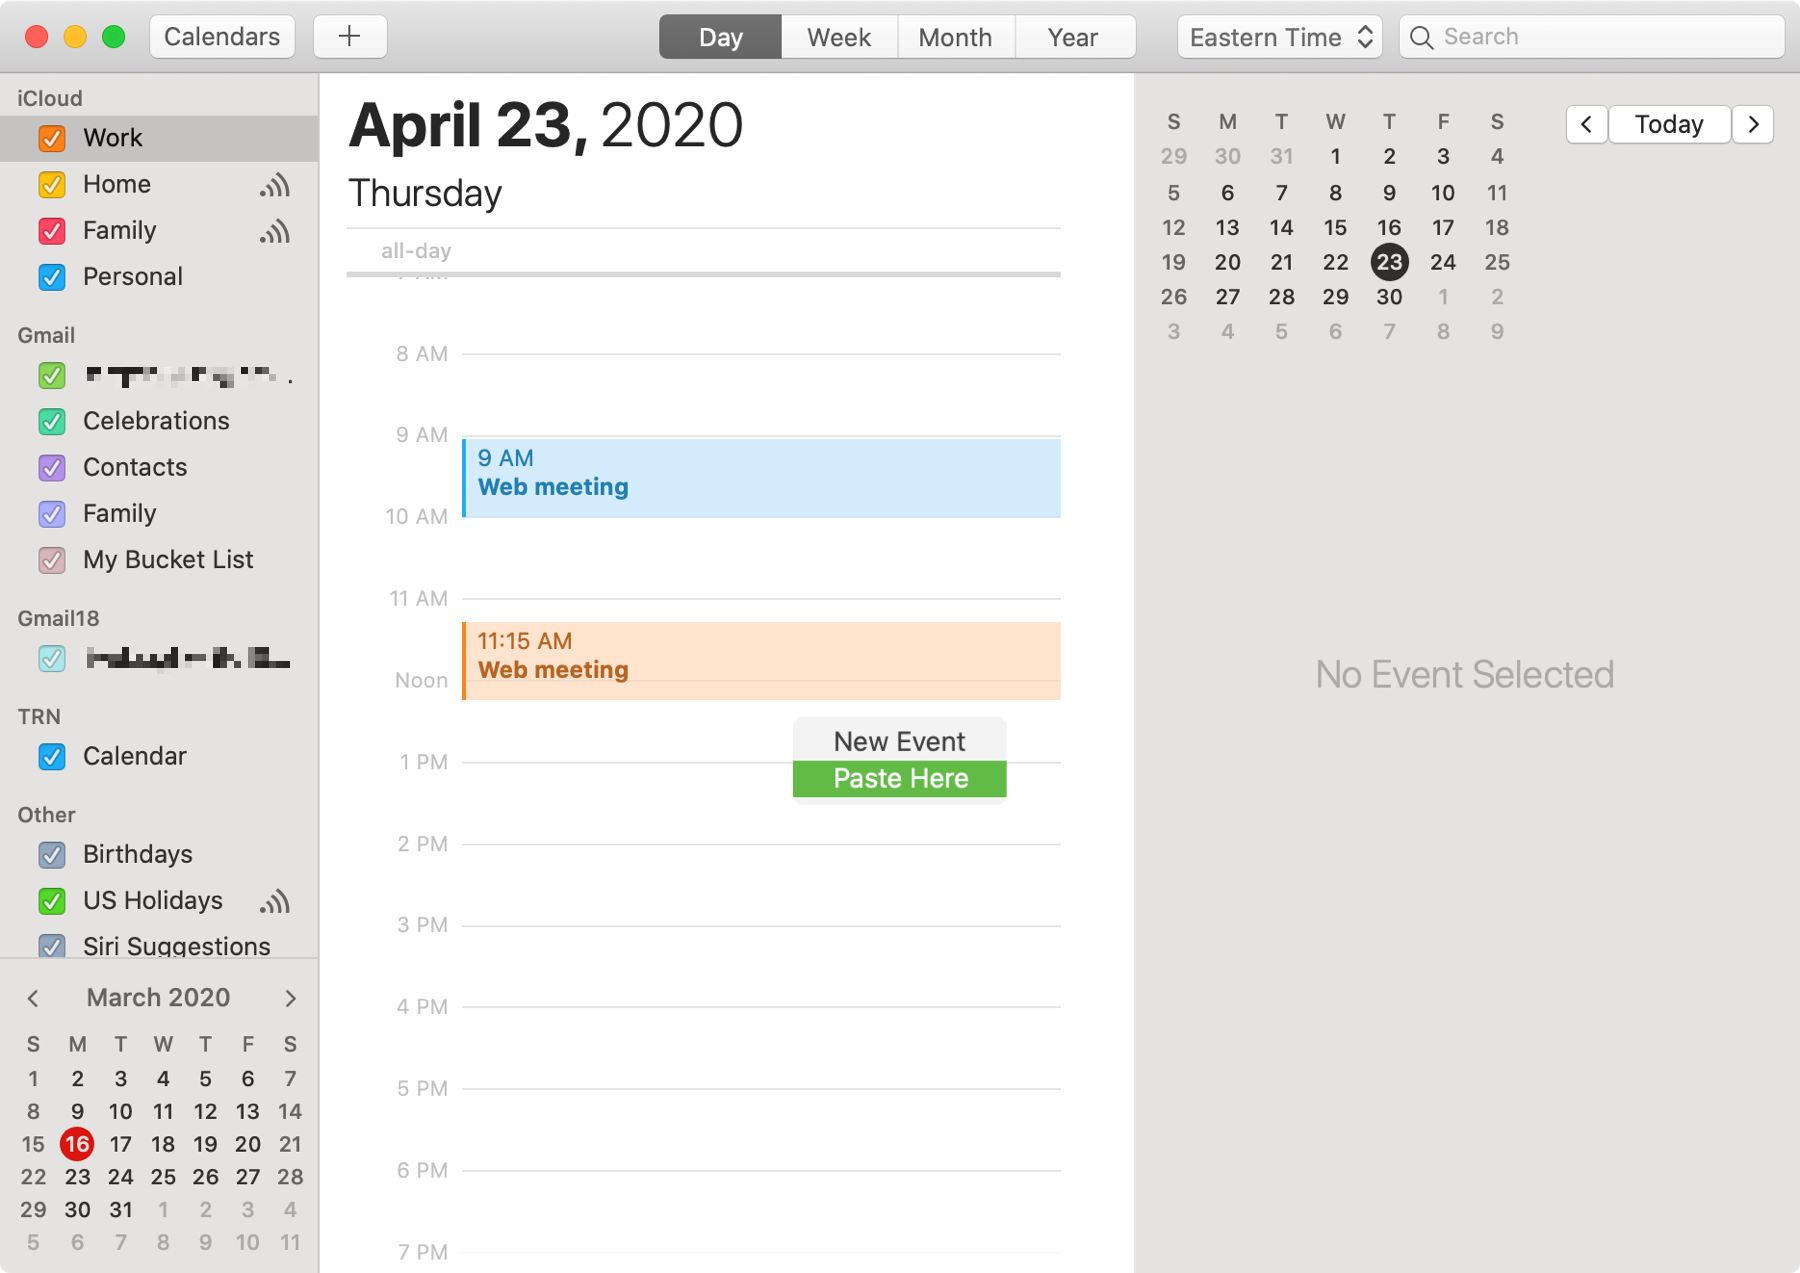 How To Add A Google Calendar Event To iCal